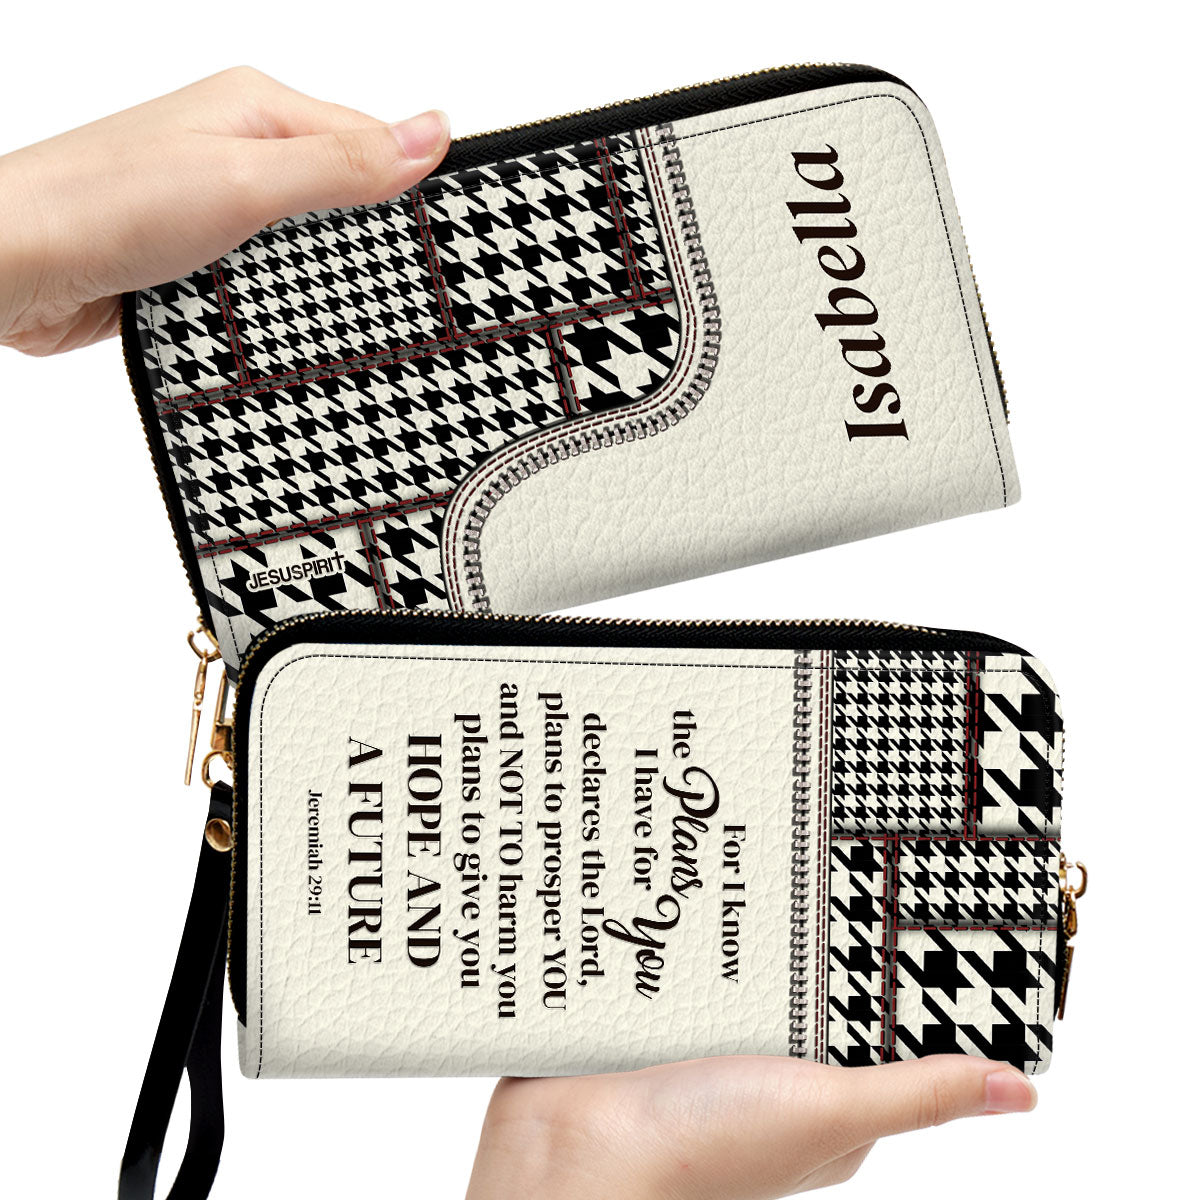 Jesuspirit | Life Is Good Because God Is Great | Personalized Leather Clutch Purse For Christian Women HIHN274A